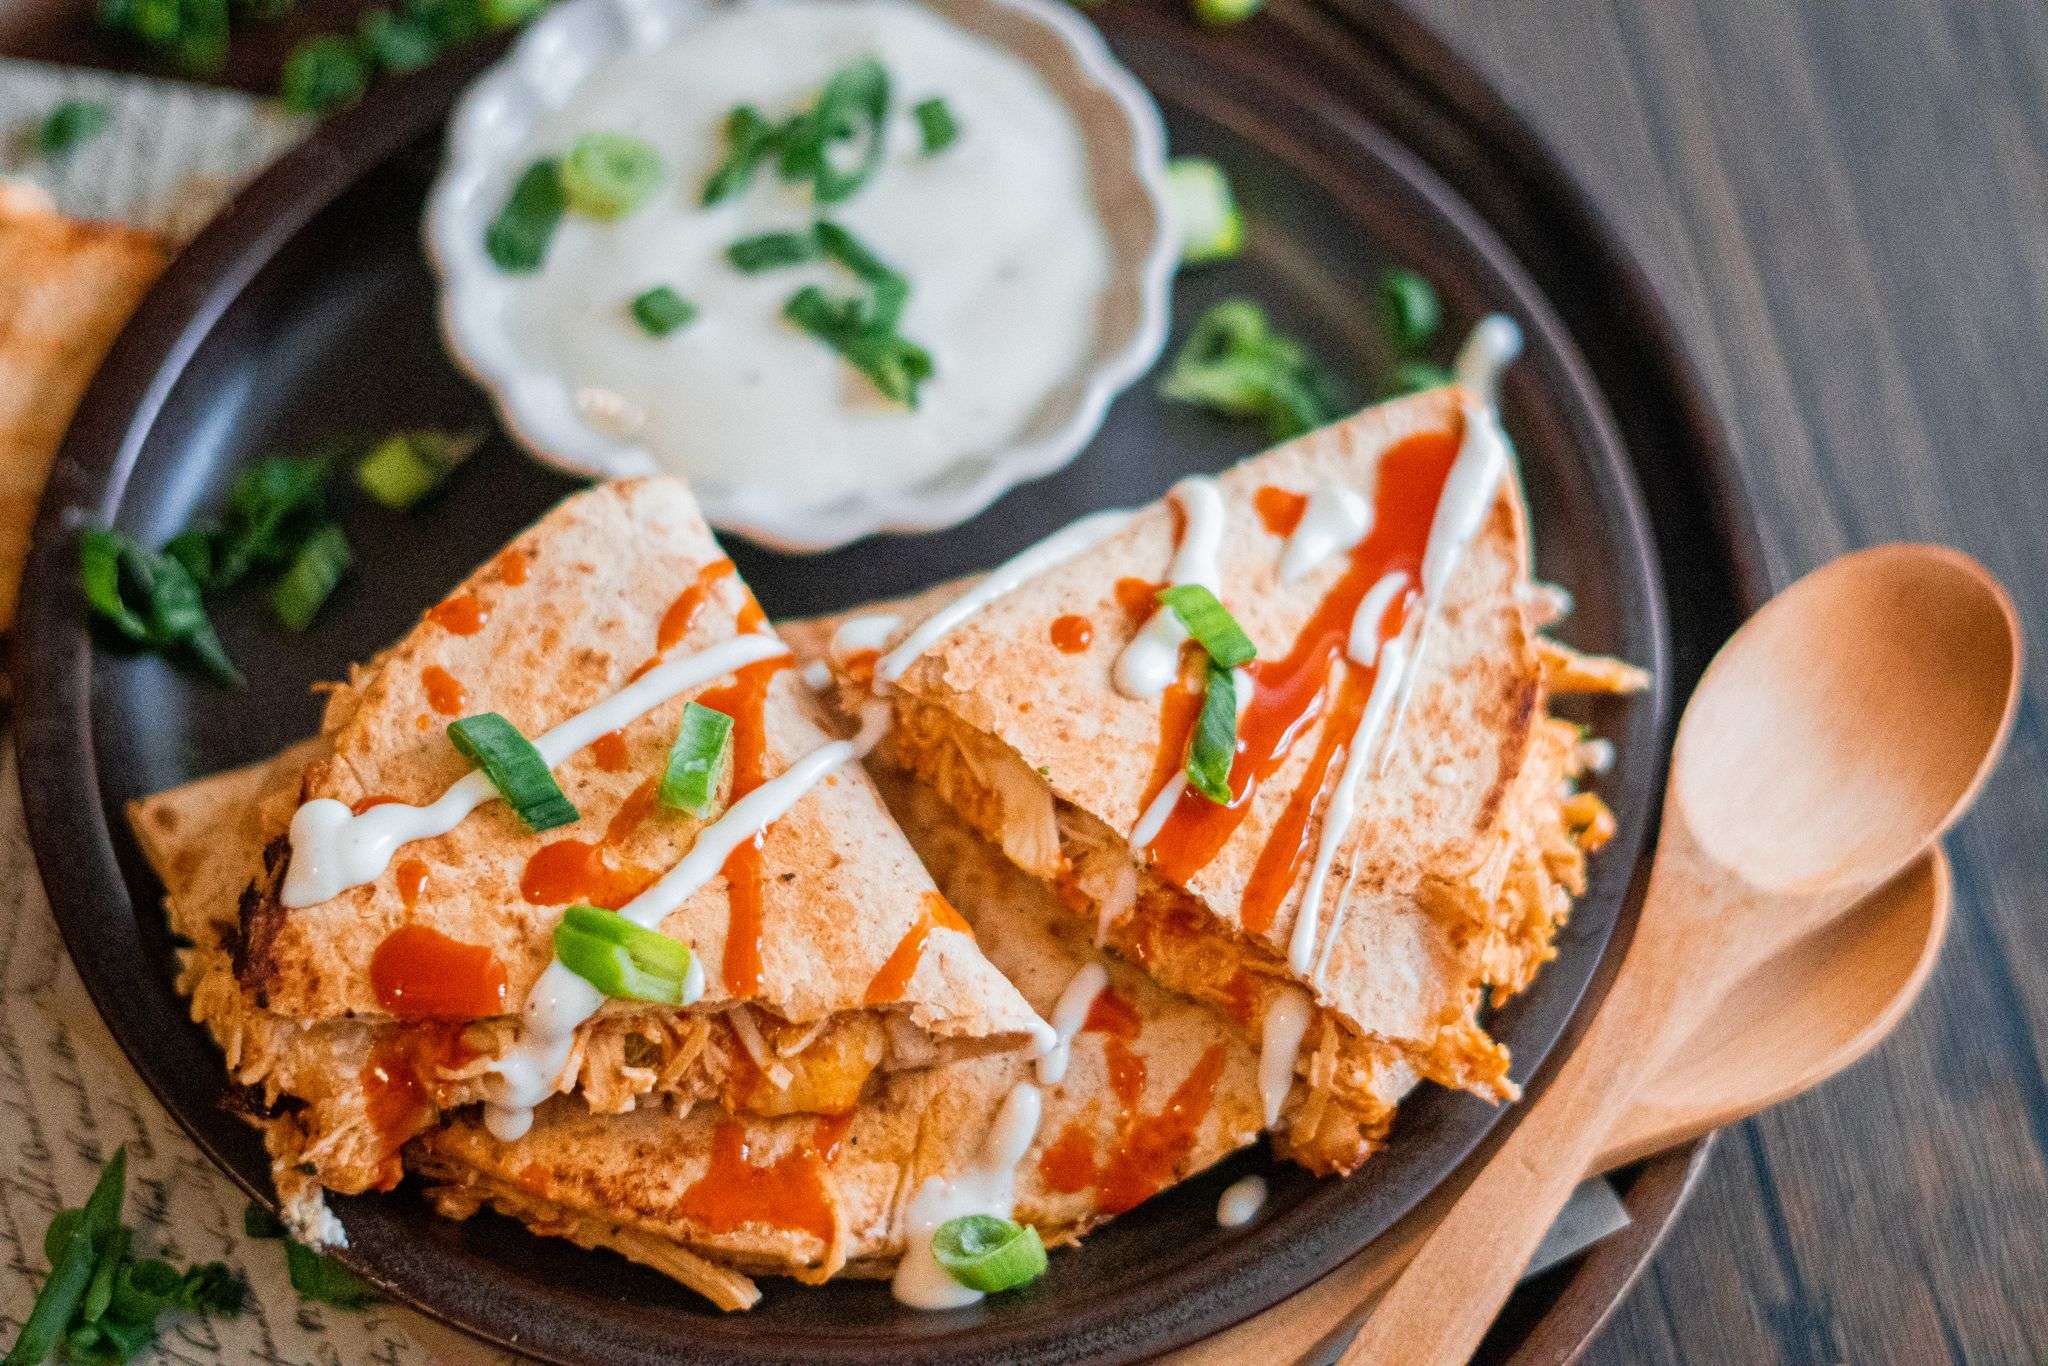 Crispy and hot buffalo chicken quesadillas. Served with dipping cream.